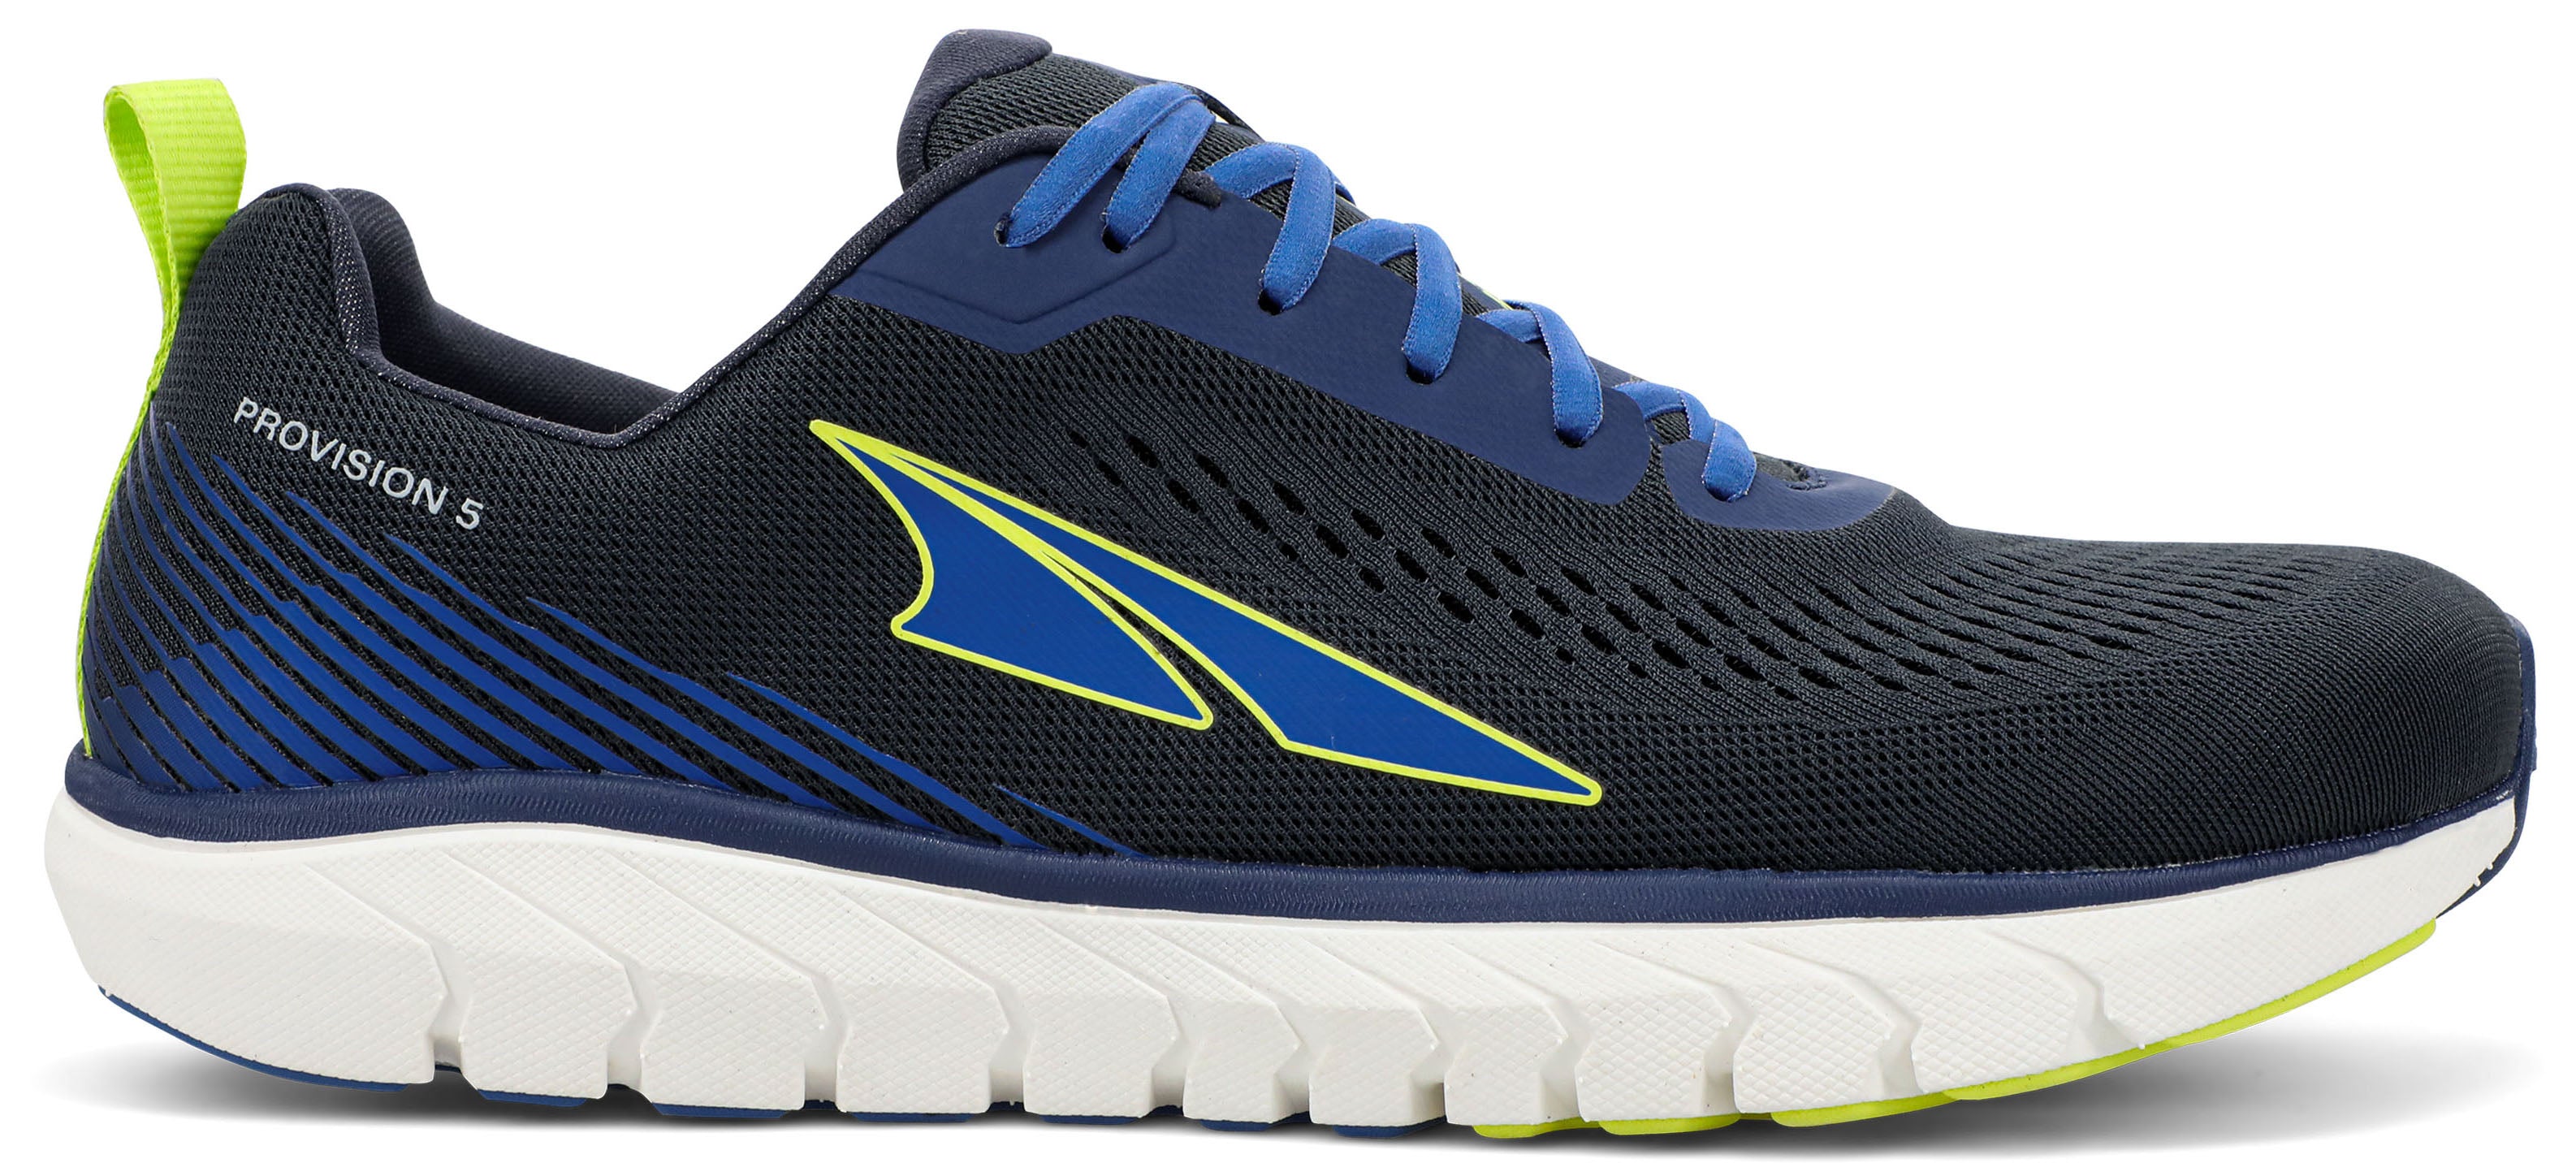 Men's Altra Provision 5 Road Running Shoe in Black/Blue from the side